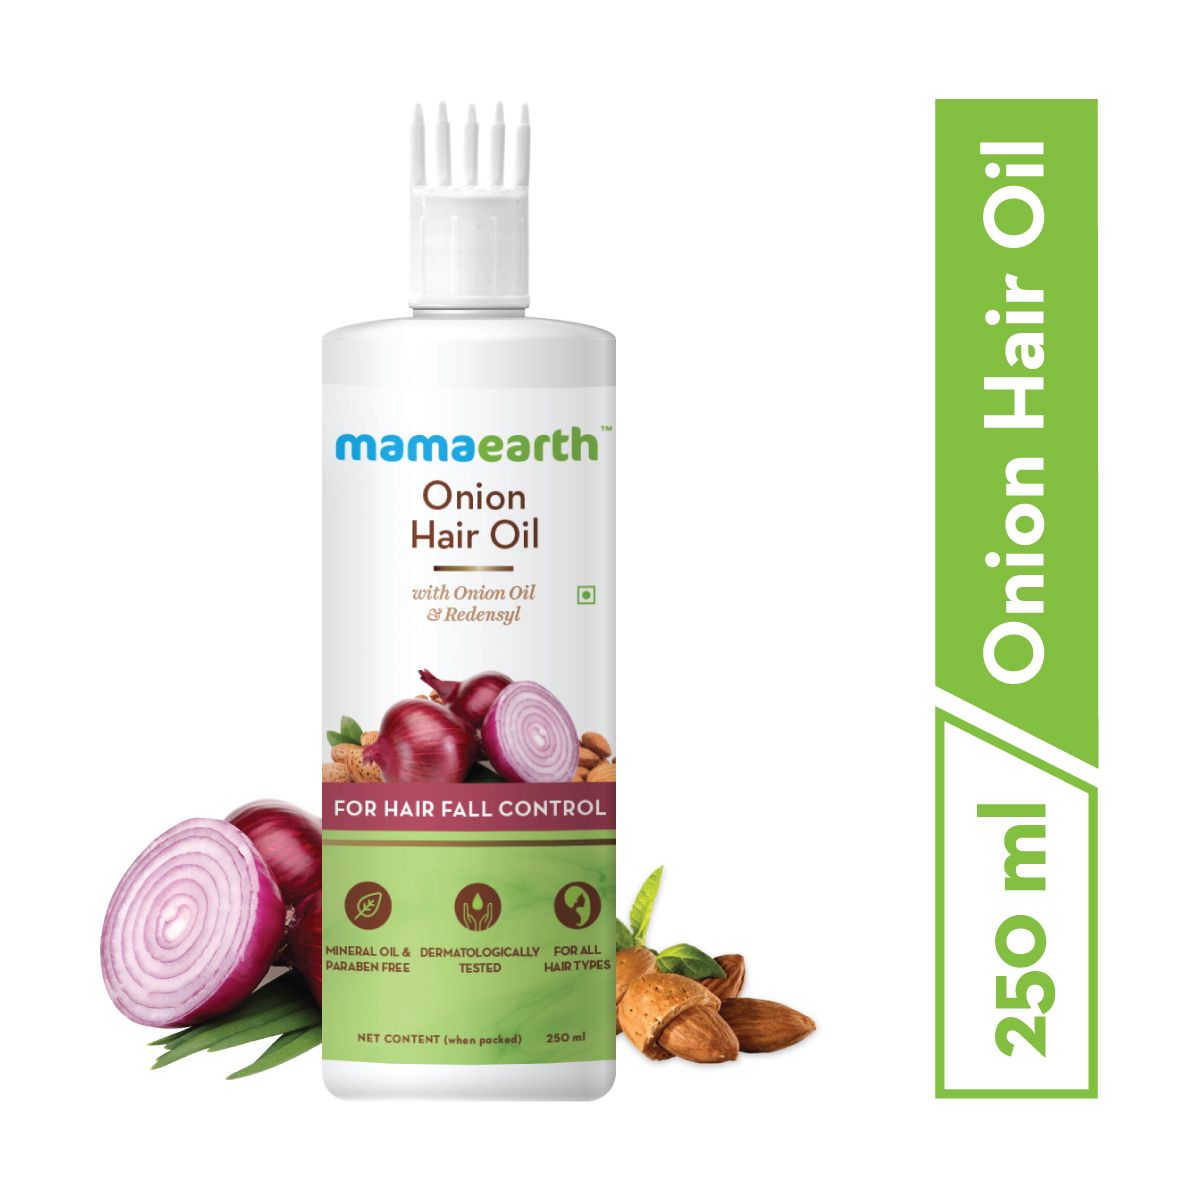 Mamaearth Onion Hair Oil Better Than Others Available In The Market